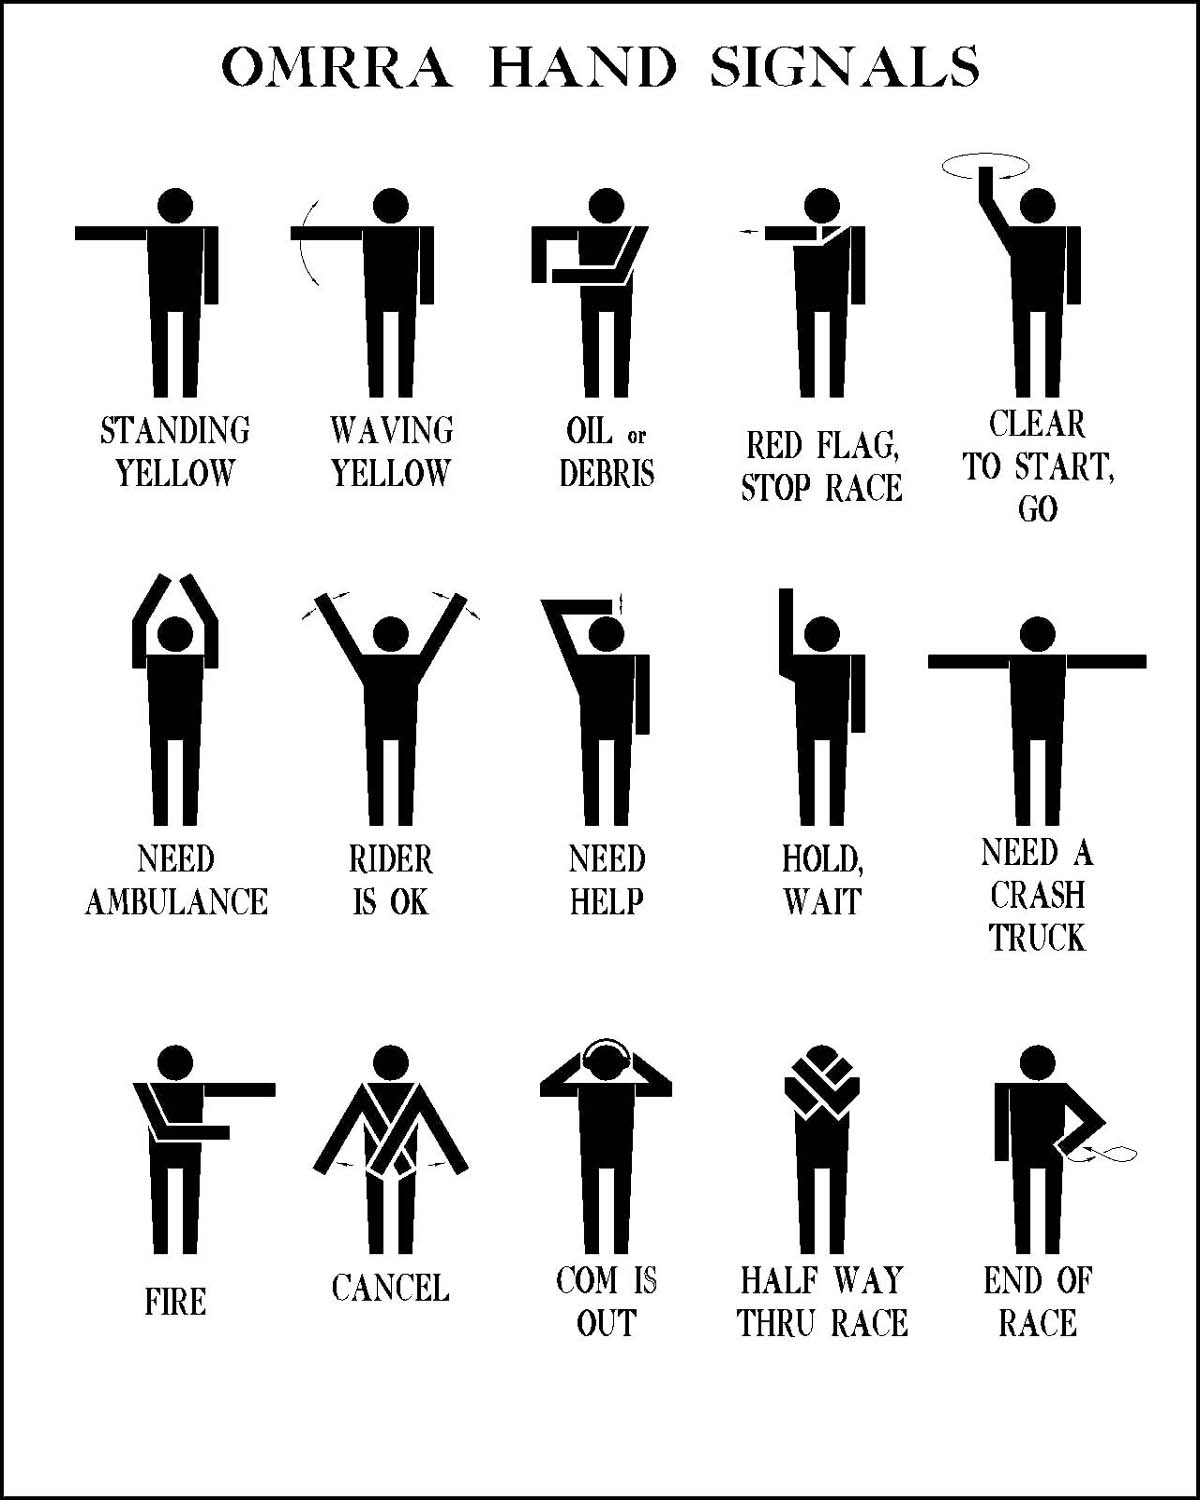 hand signals of volleyball referee